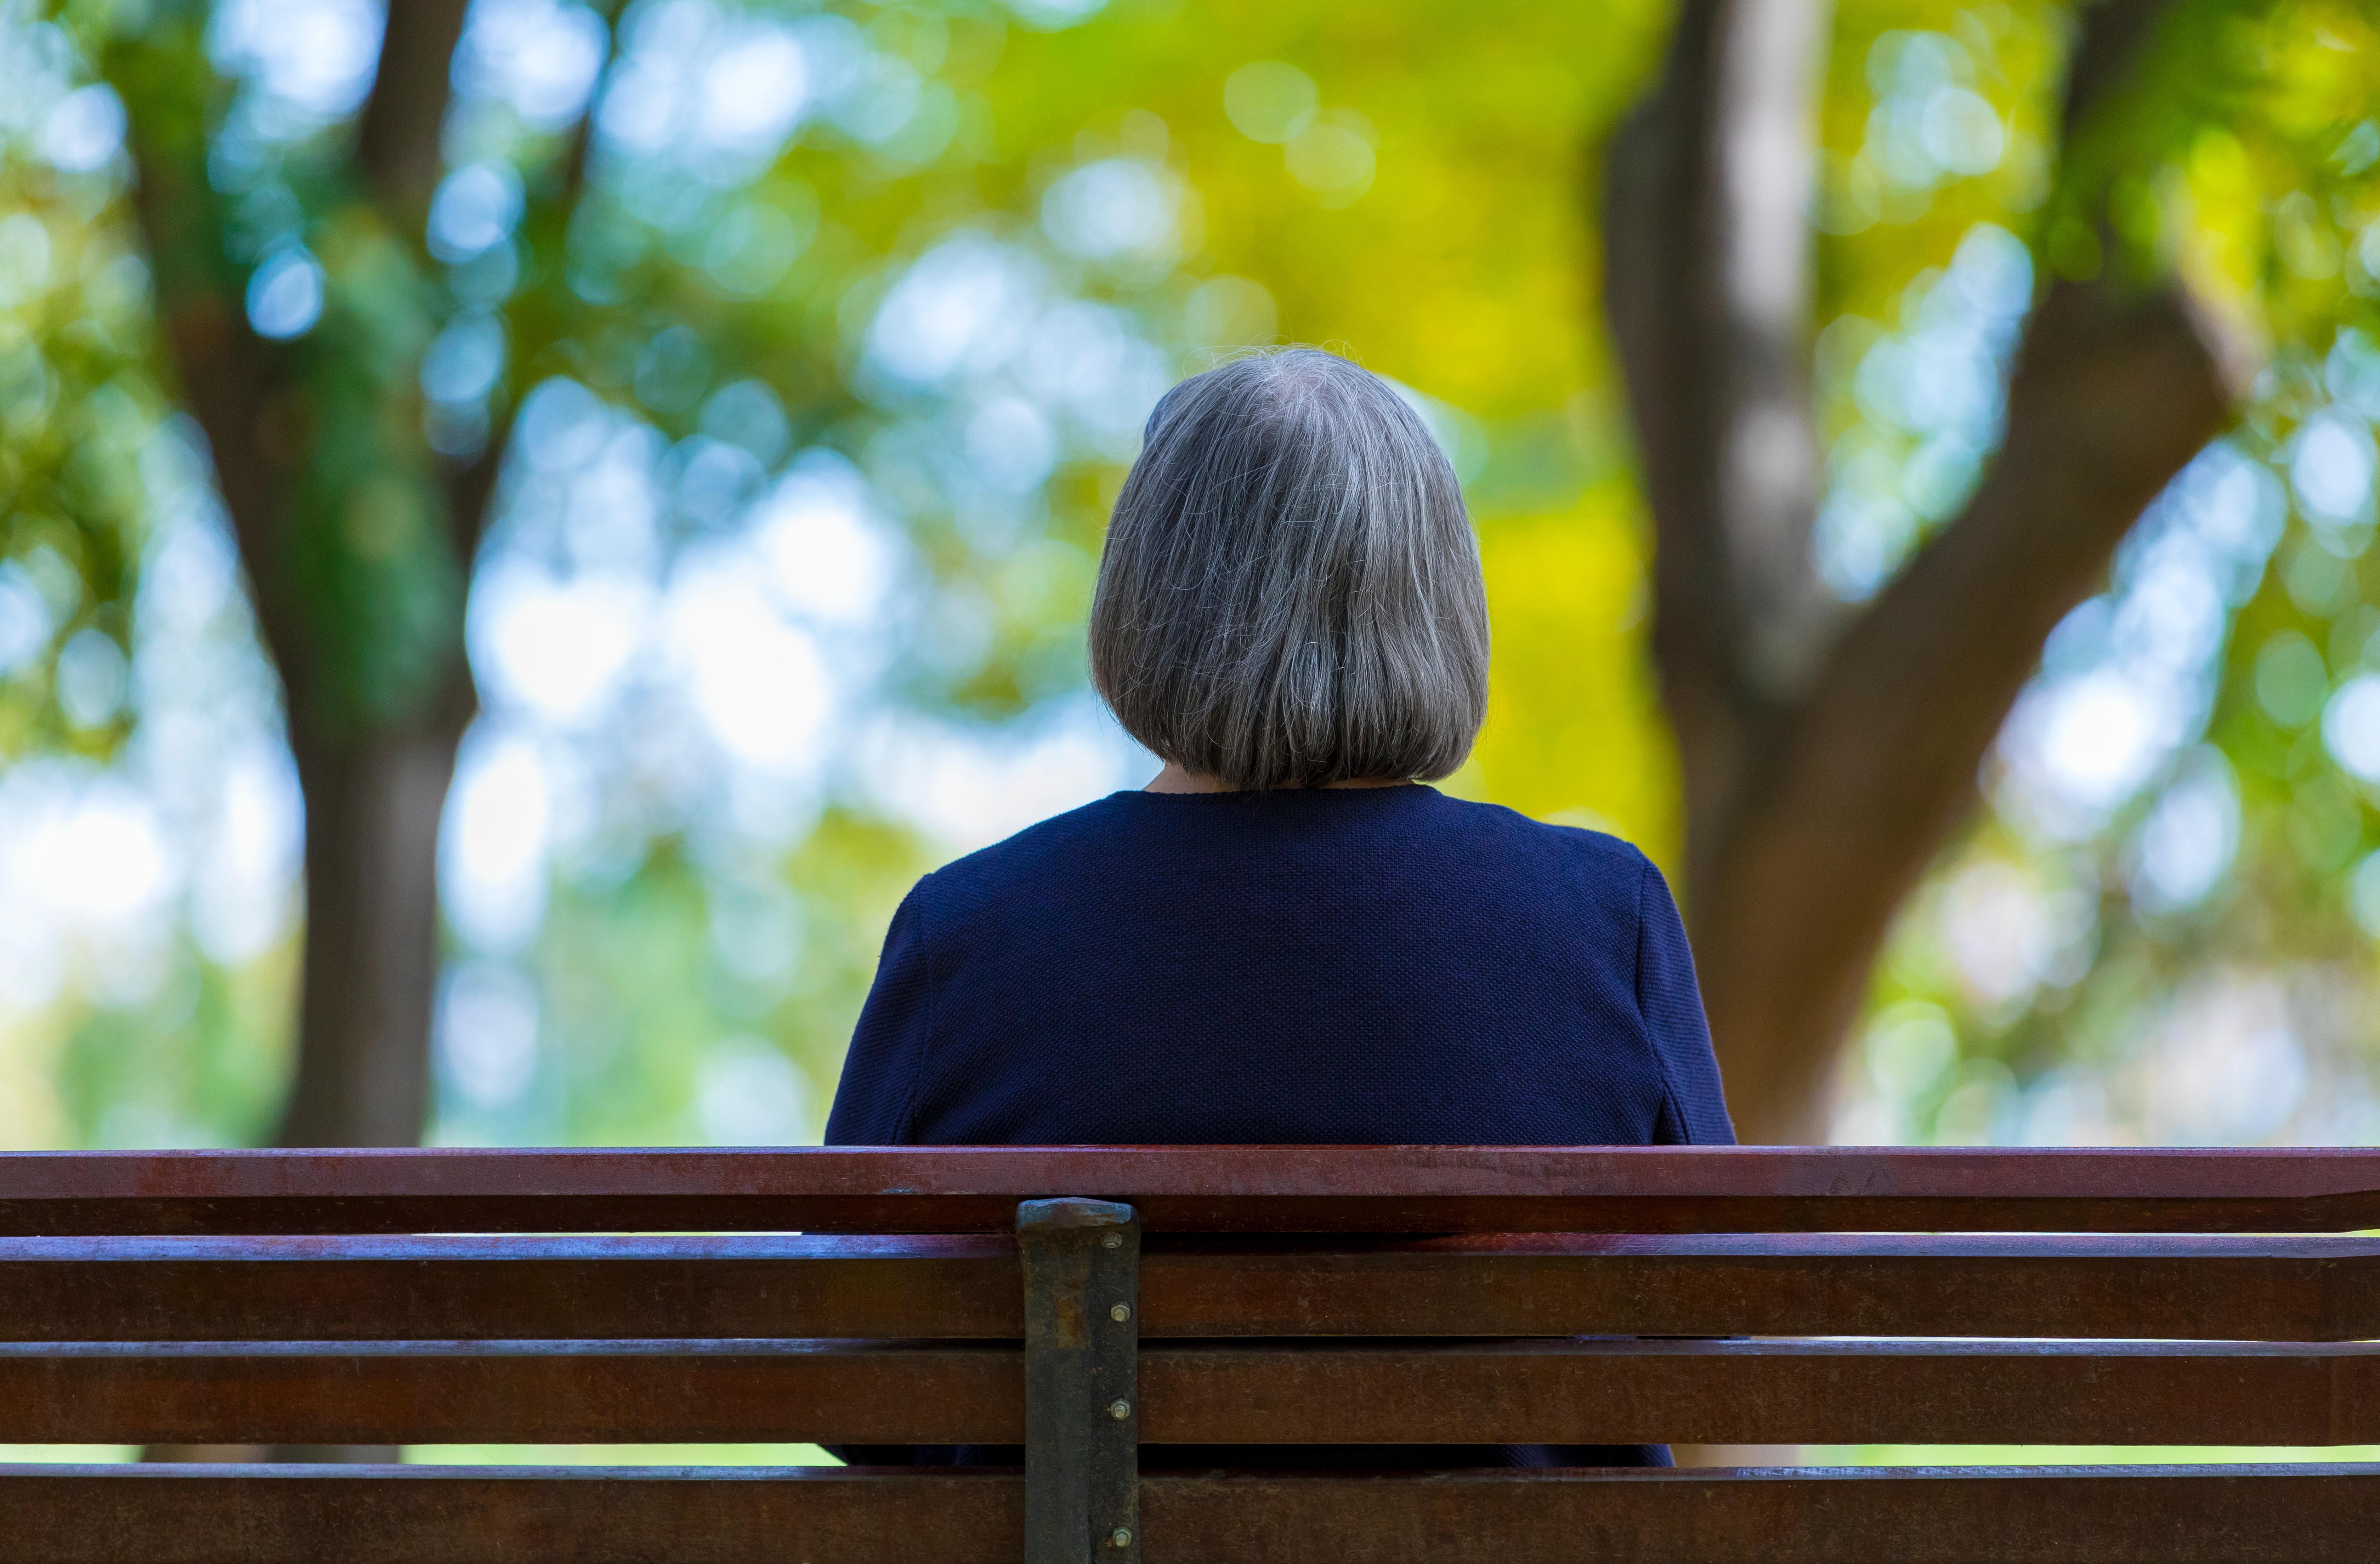 A senior woman sitting alone on a bench | Source: Shutterstock